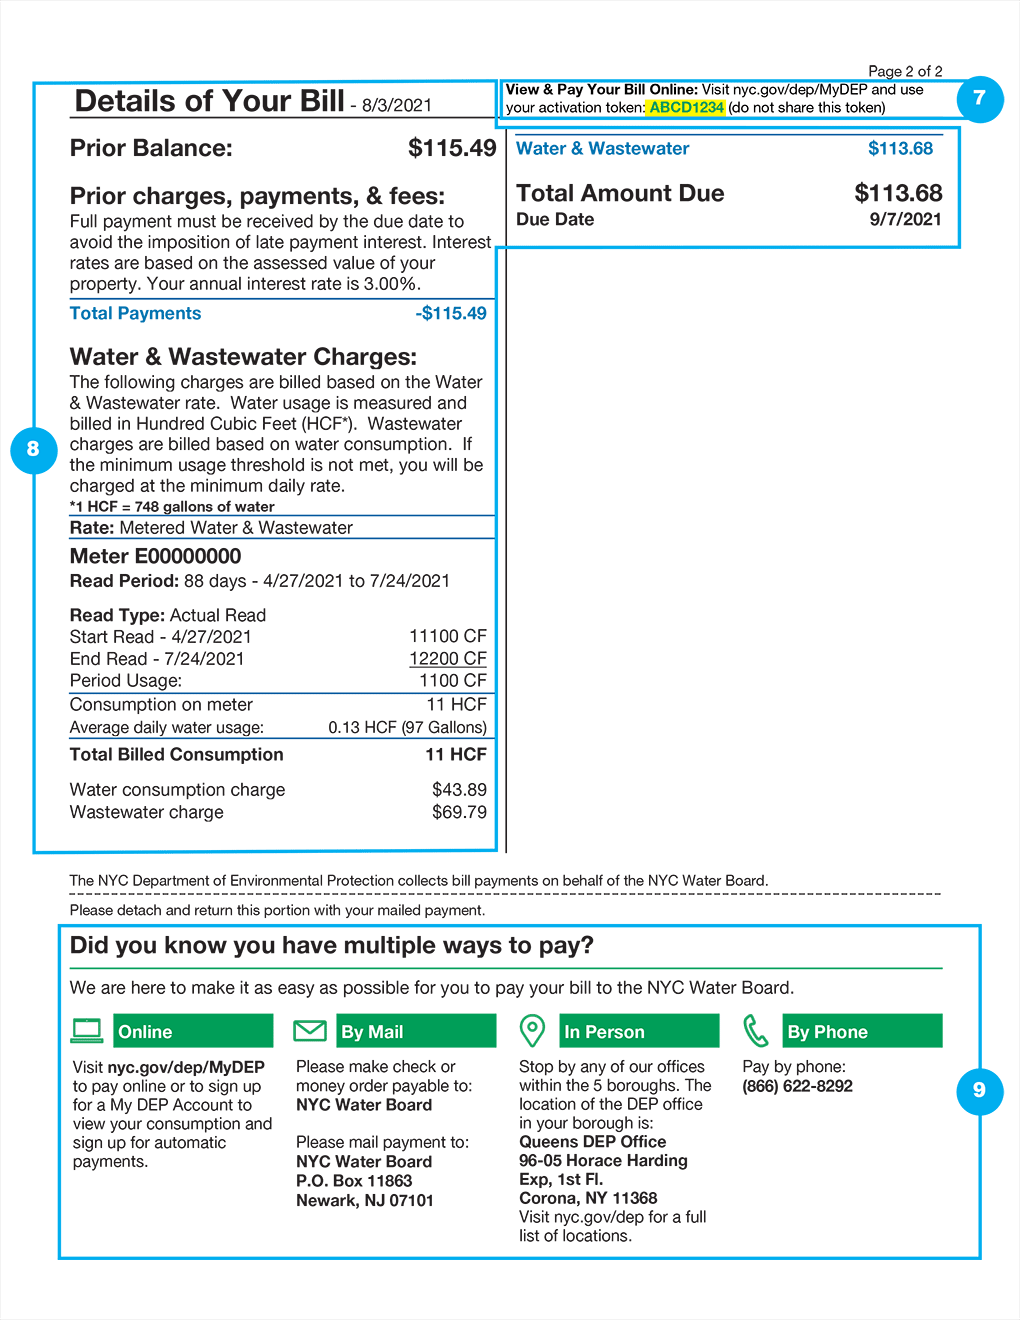 Page 2 of sample bill, with Activation Token, Bill Details, and Ways to Pay Your Bill highlighted.